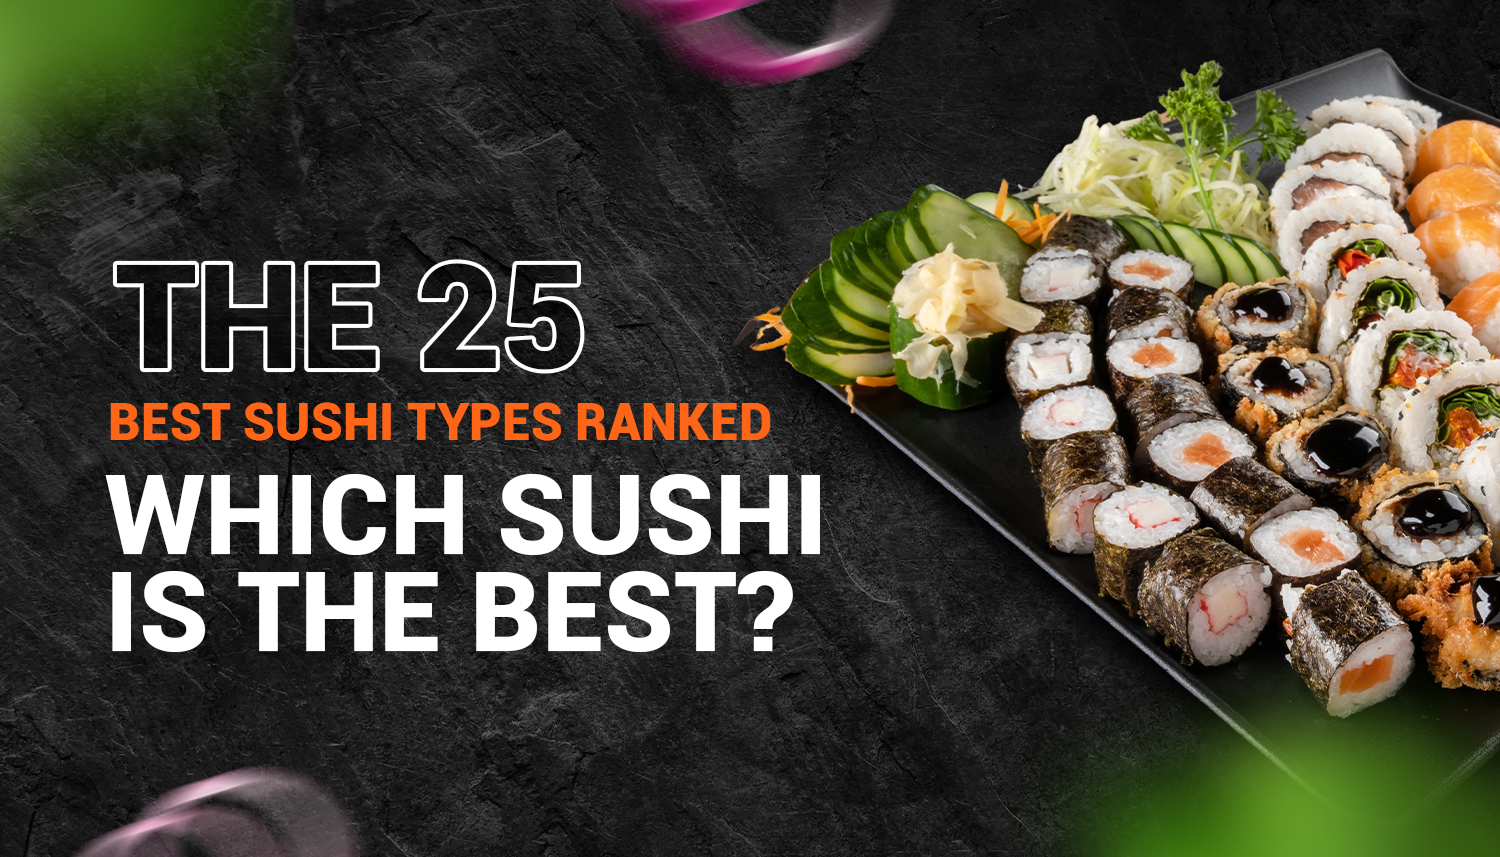 The 25 Best Sushi Types Ranked | Which Sushi is the Best?